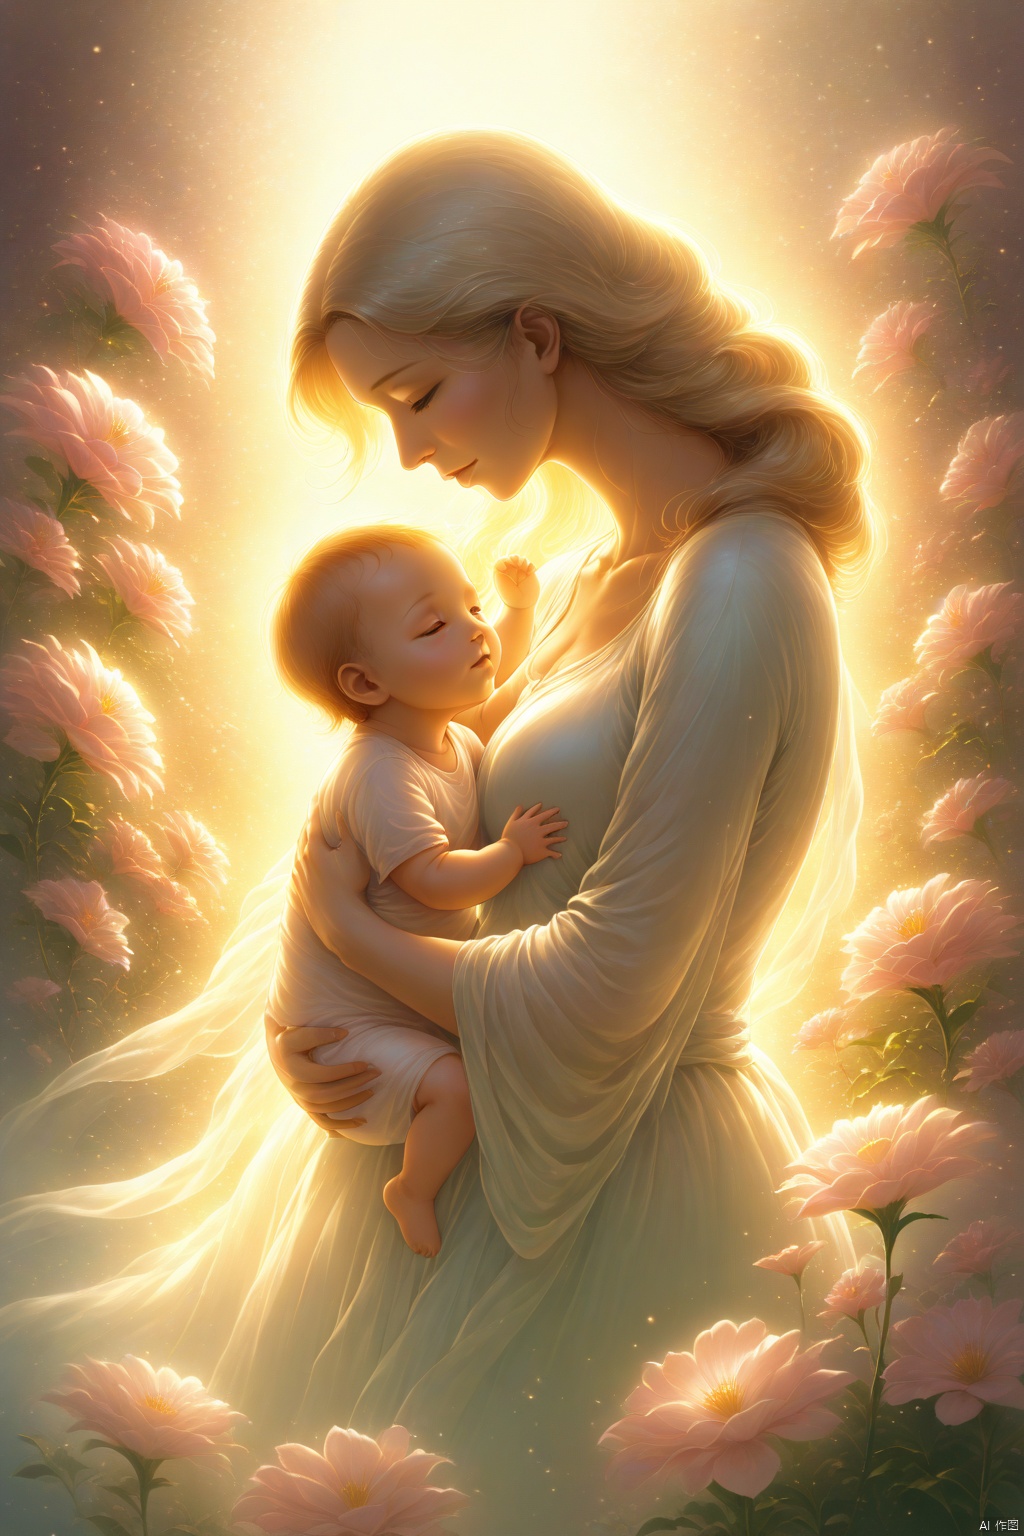 In the soft light of the early morning, mother and baby embrace each other in blooming flowers, capturing a moment of tenderness. The ethereal light accentuates their characteristics in a surrealist manner, creating a dreamlike atmosphere that resonates with the essence of love. The focus is on their faces